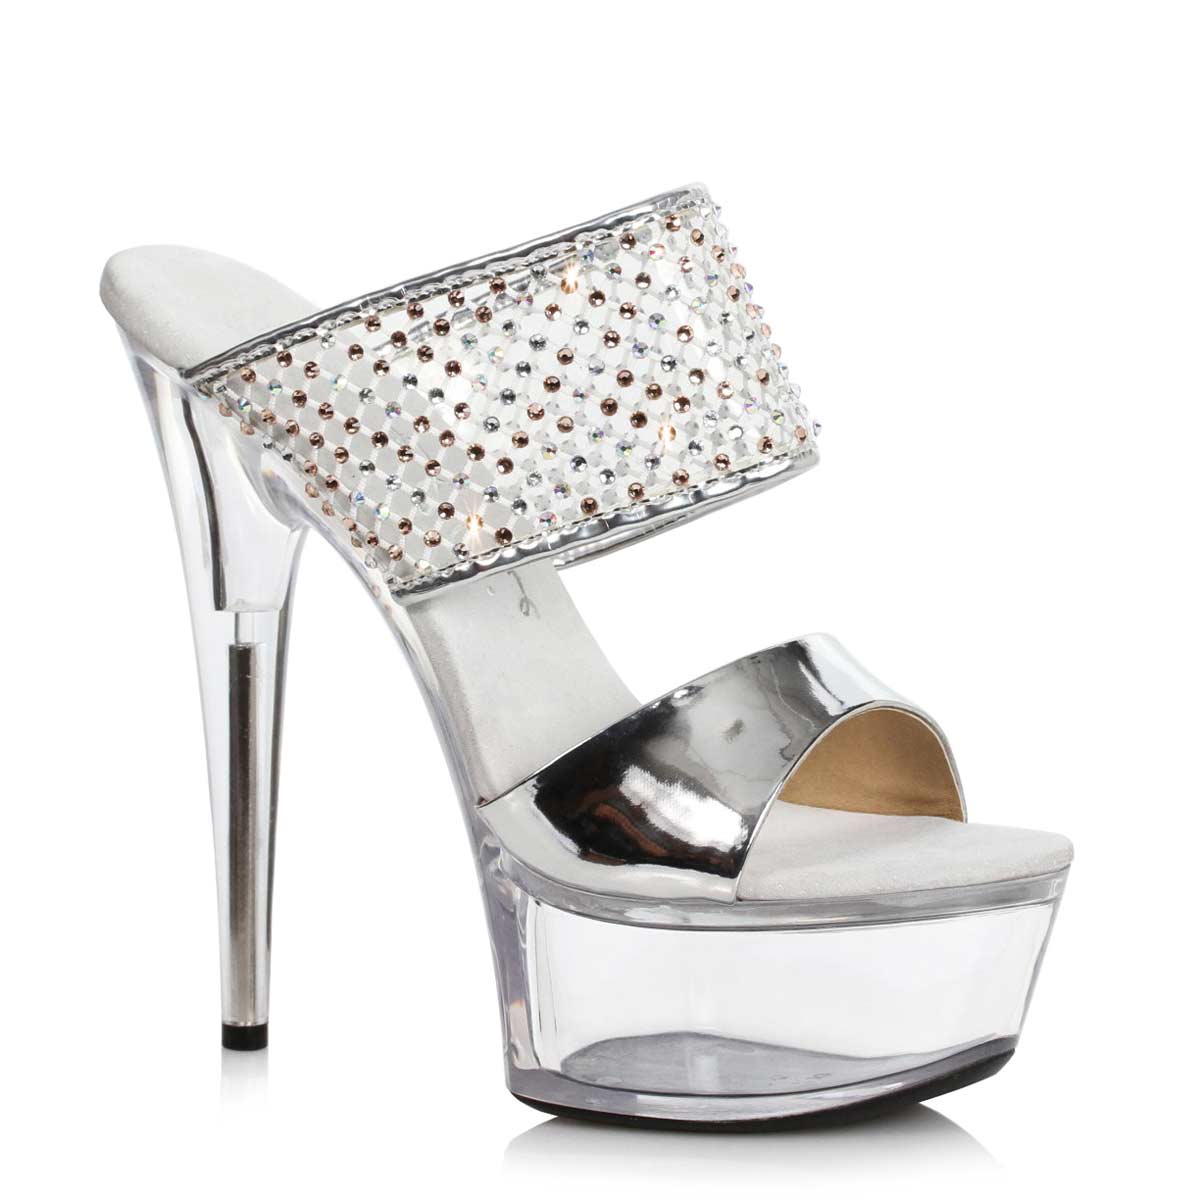 Ellie Shoes 609-AILEEN Silver in Sexy Heels & Platforms - $87.99